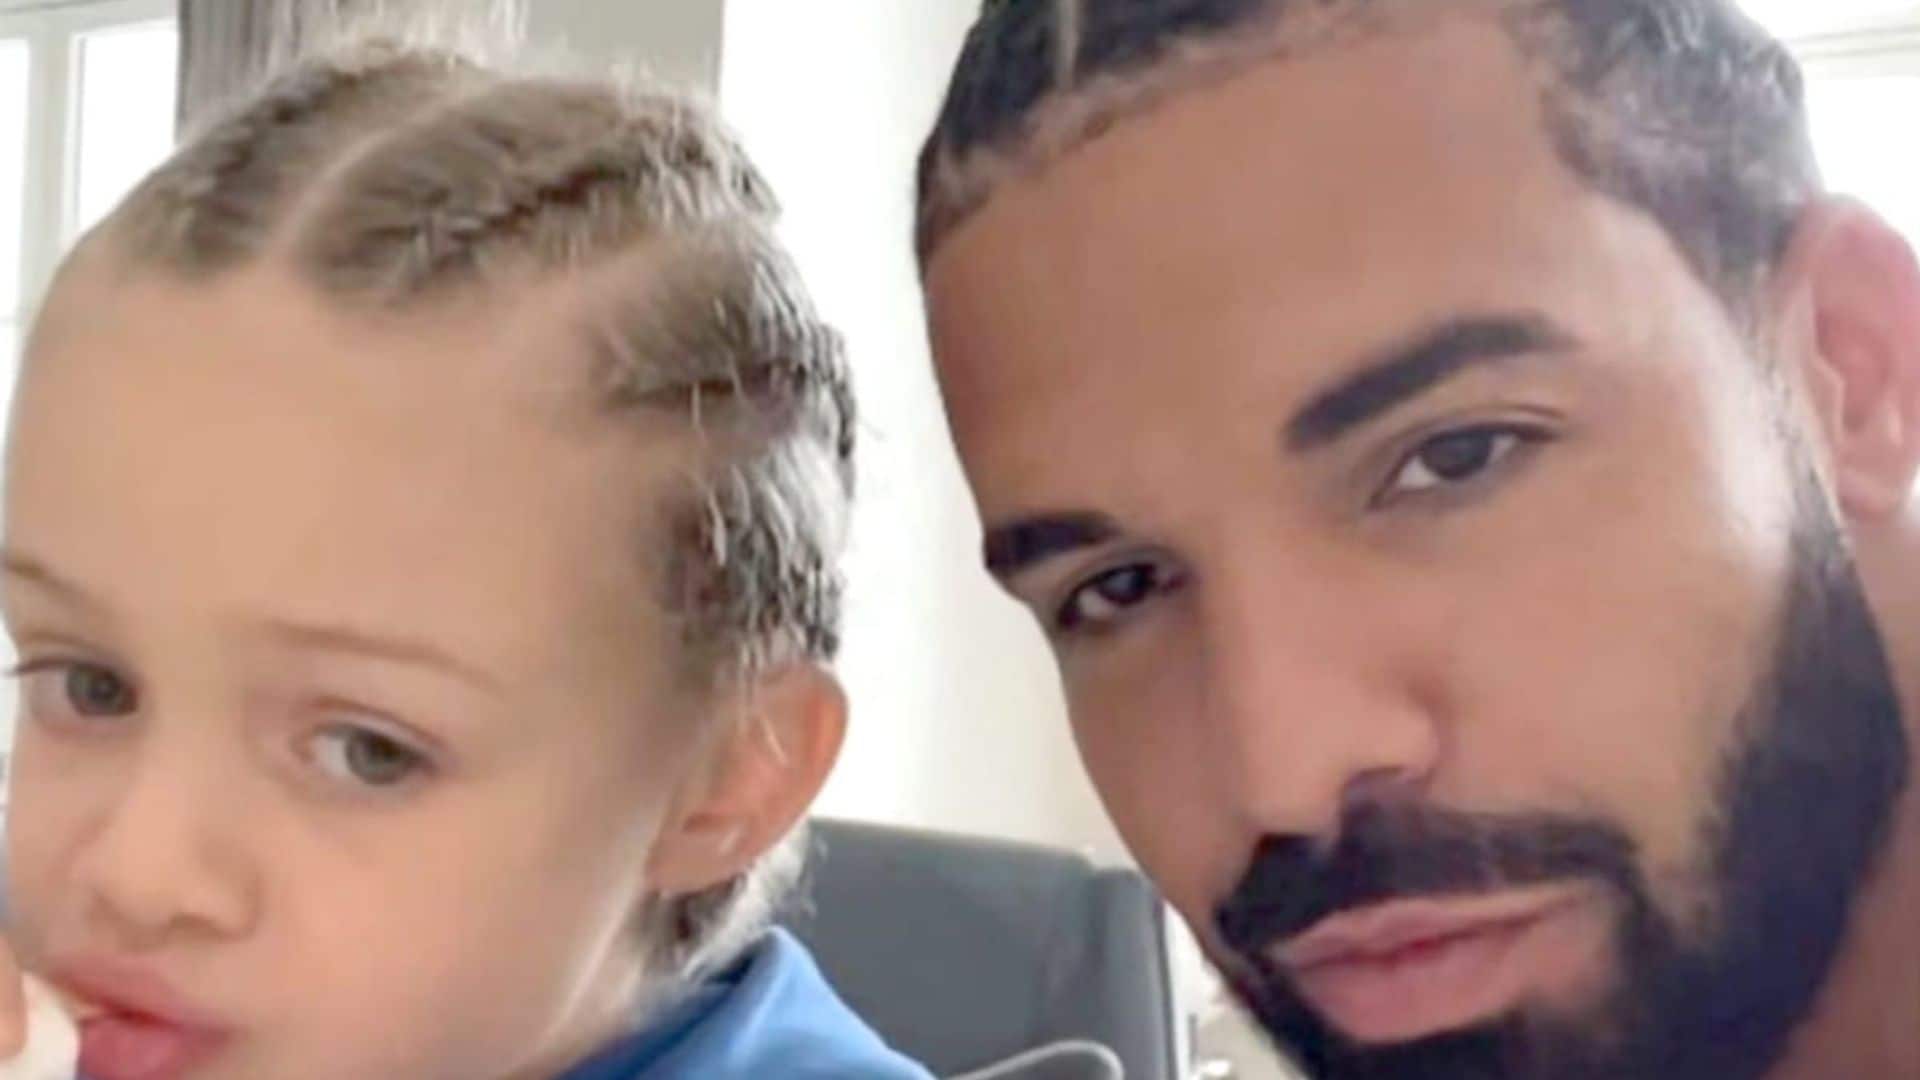 Drake proves Adonis is his mini-me as they show off matching braids